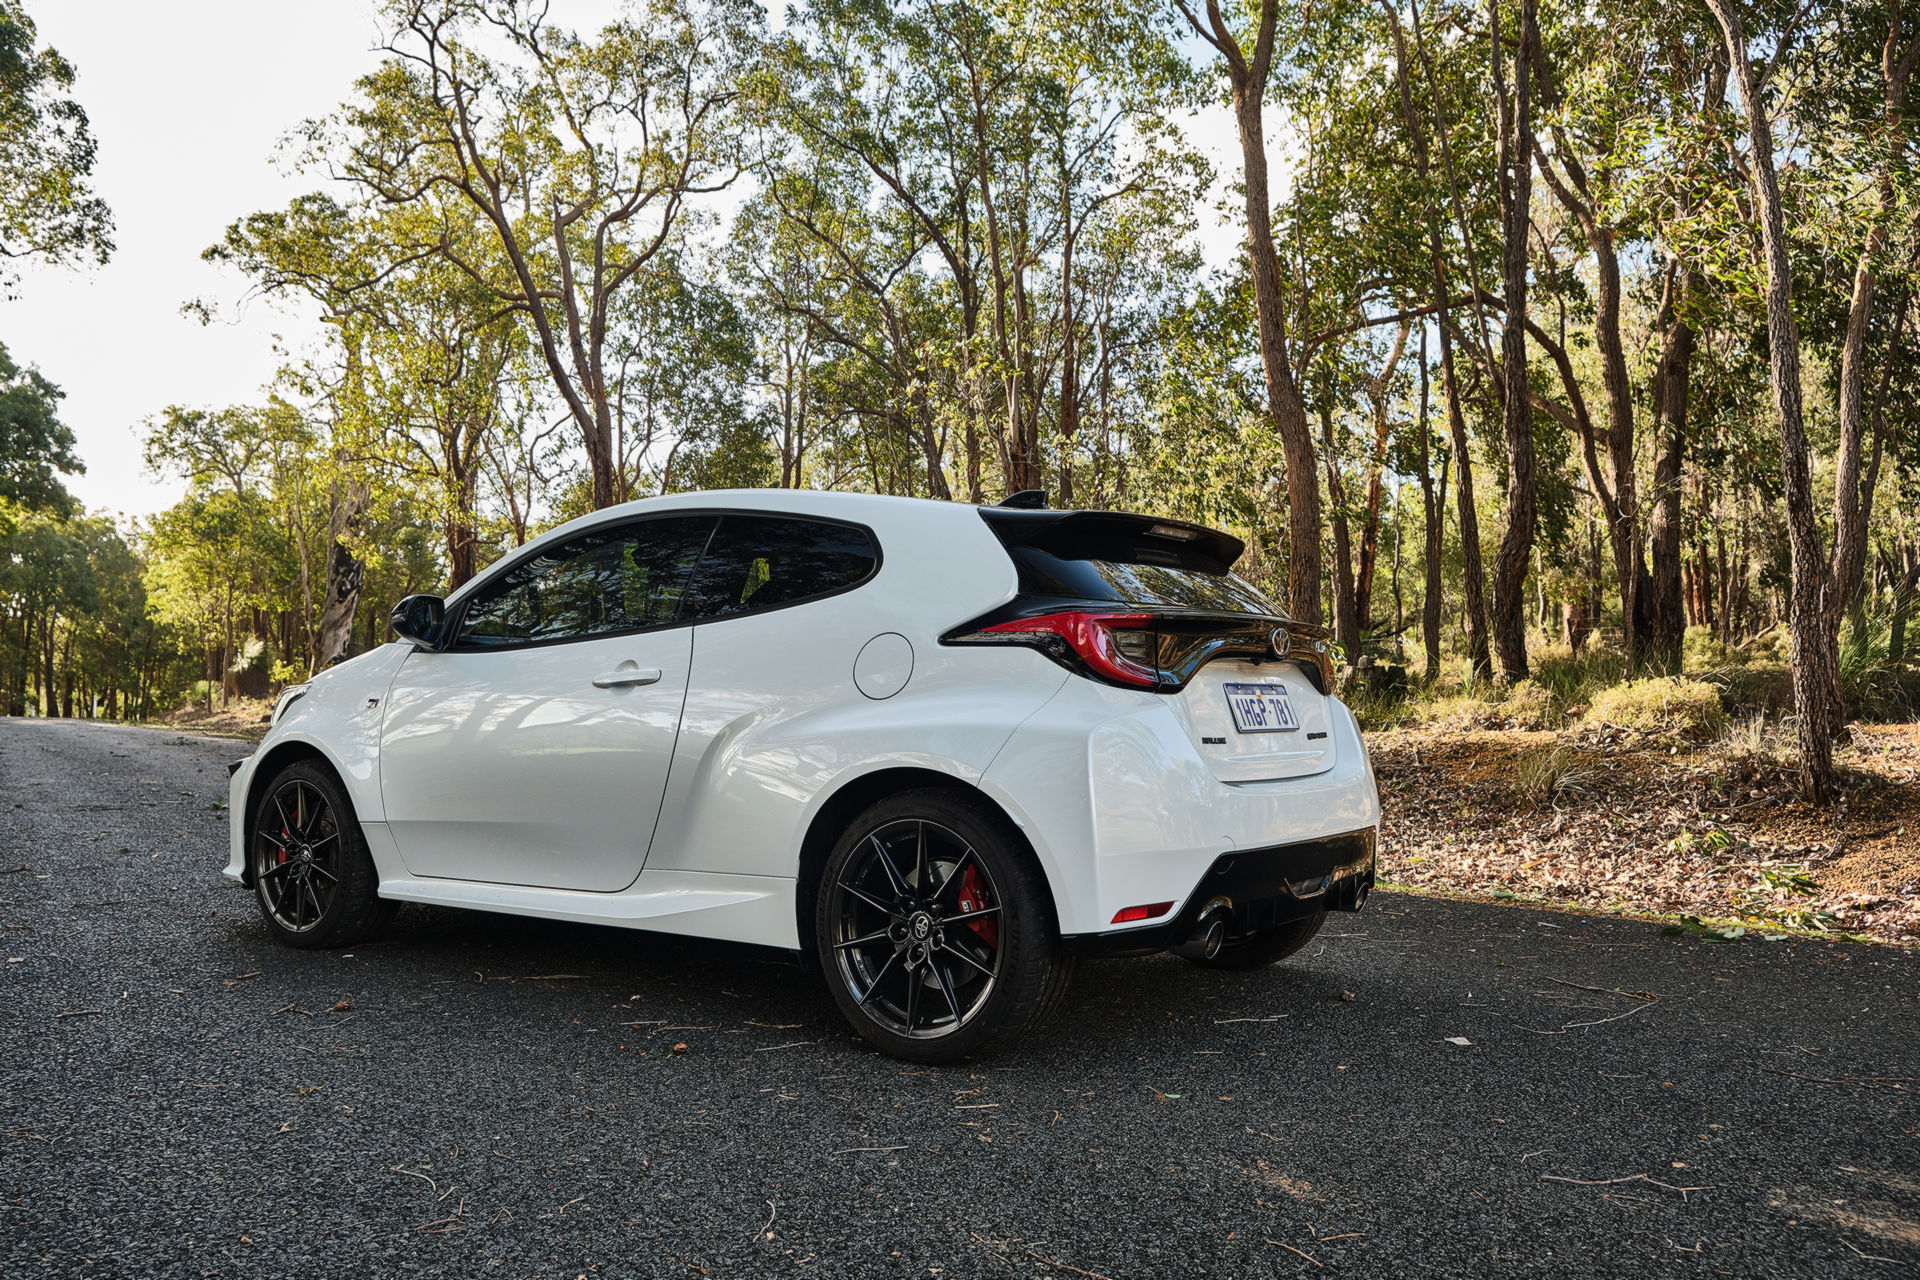 Ask the expert: 'Why is the high-performance Toyota GR Yaris so expensive?